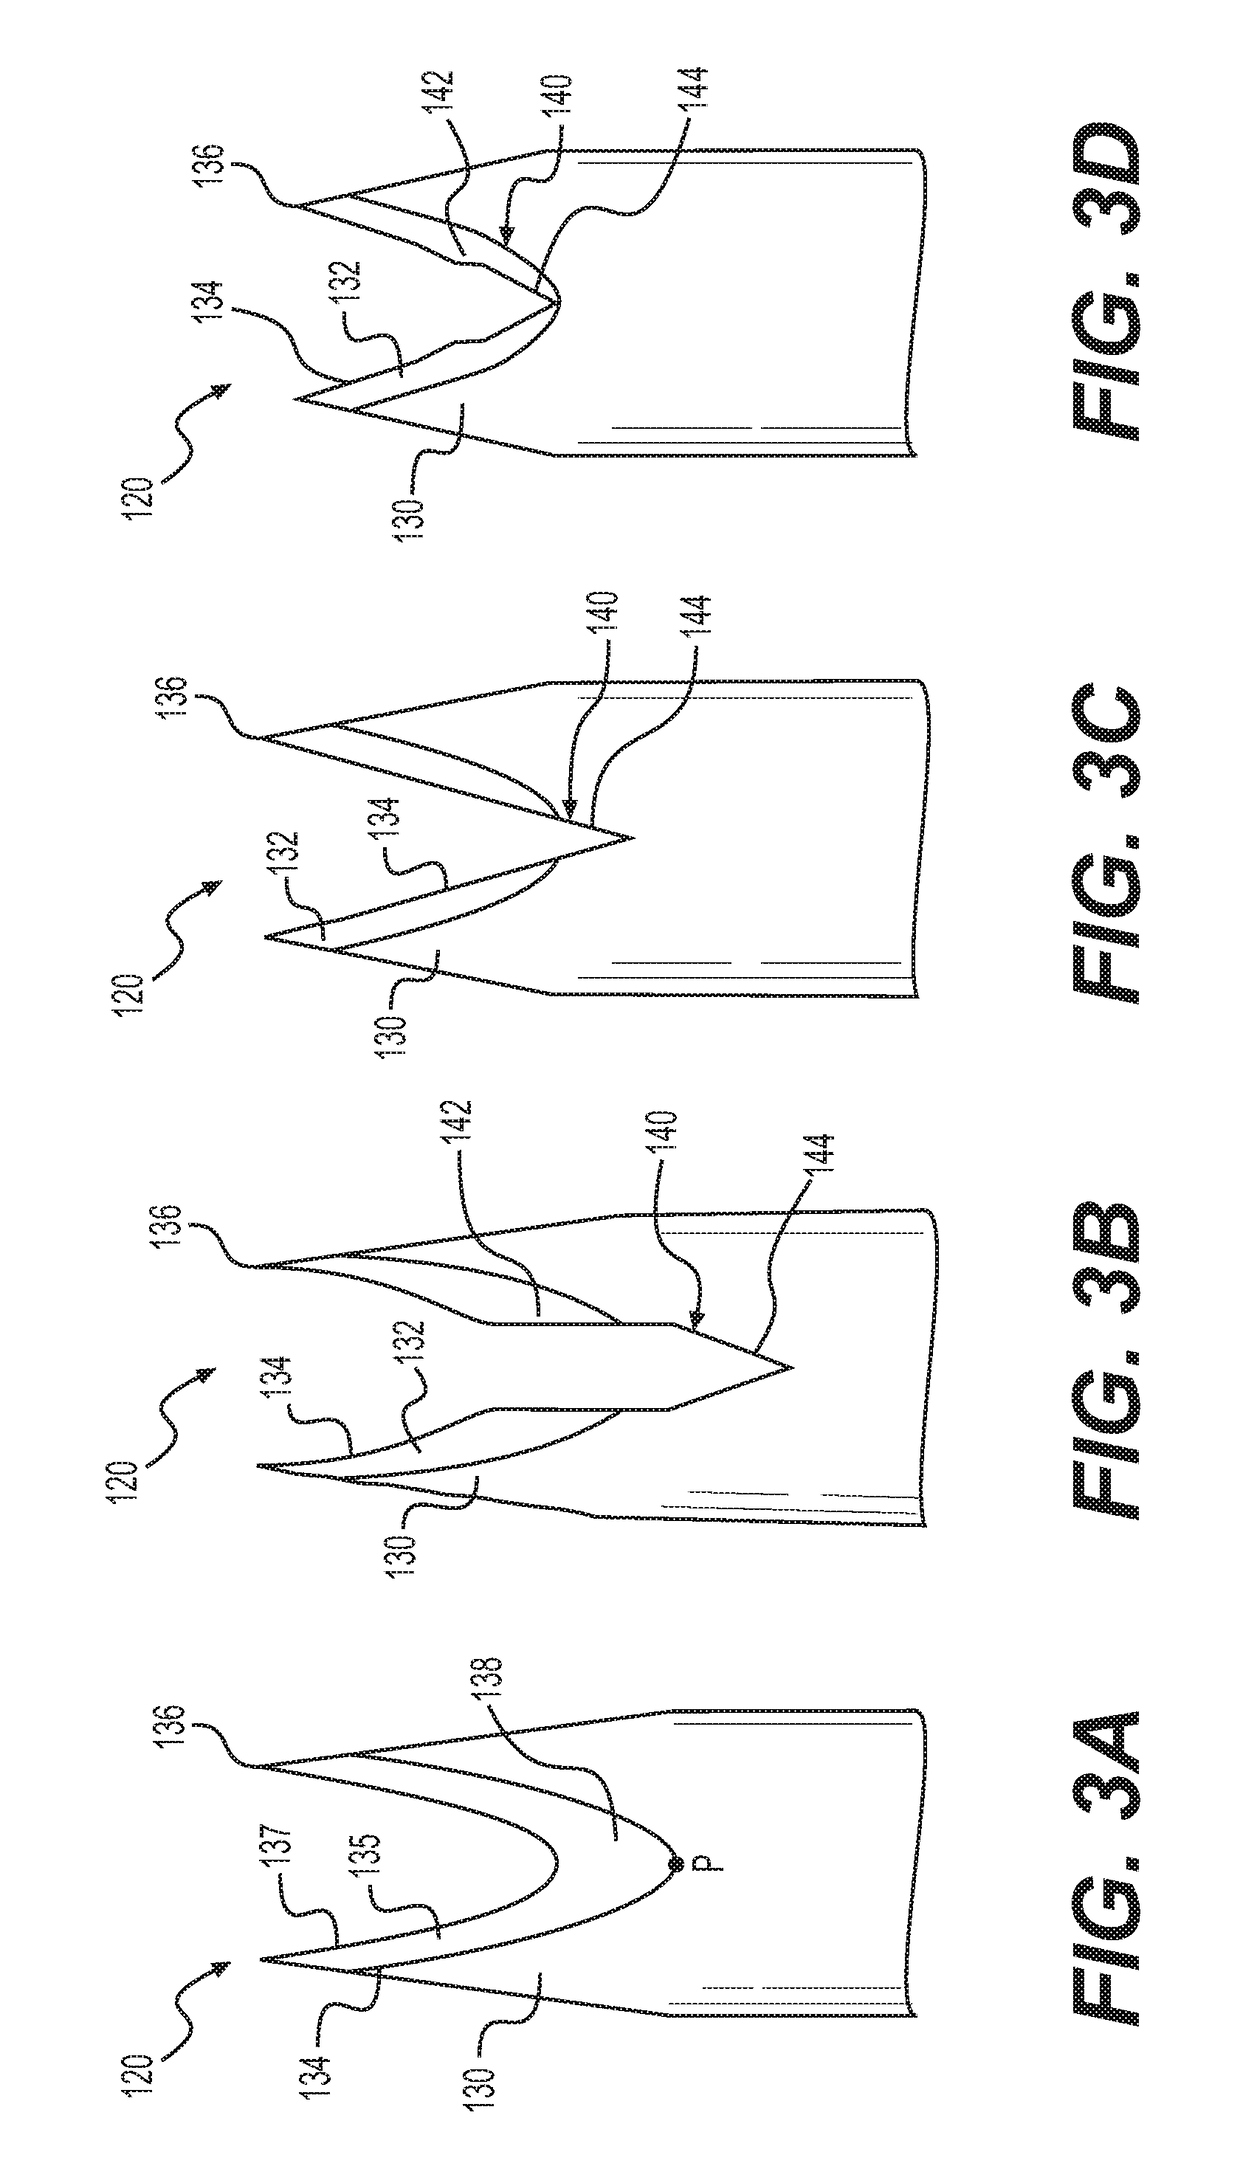 Endoscopic biopsy needle tip and methods of use